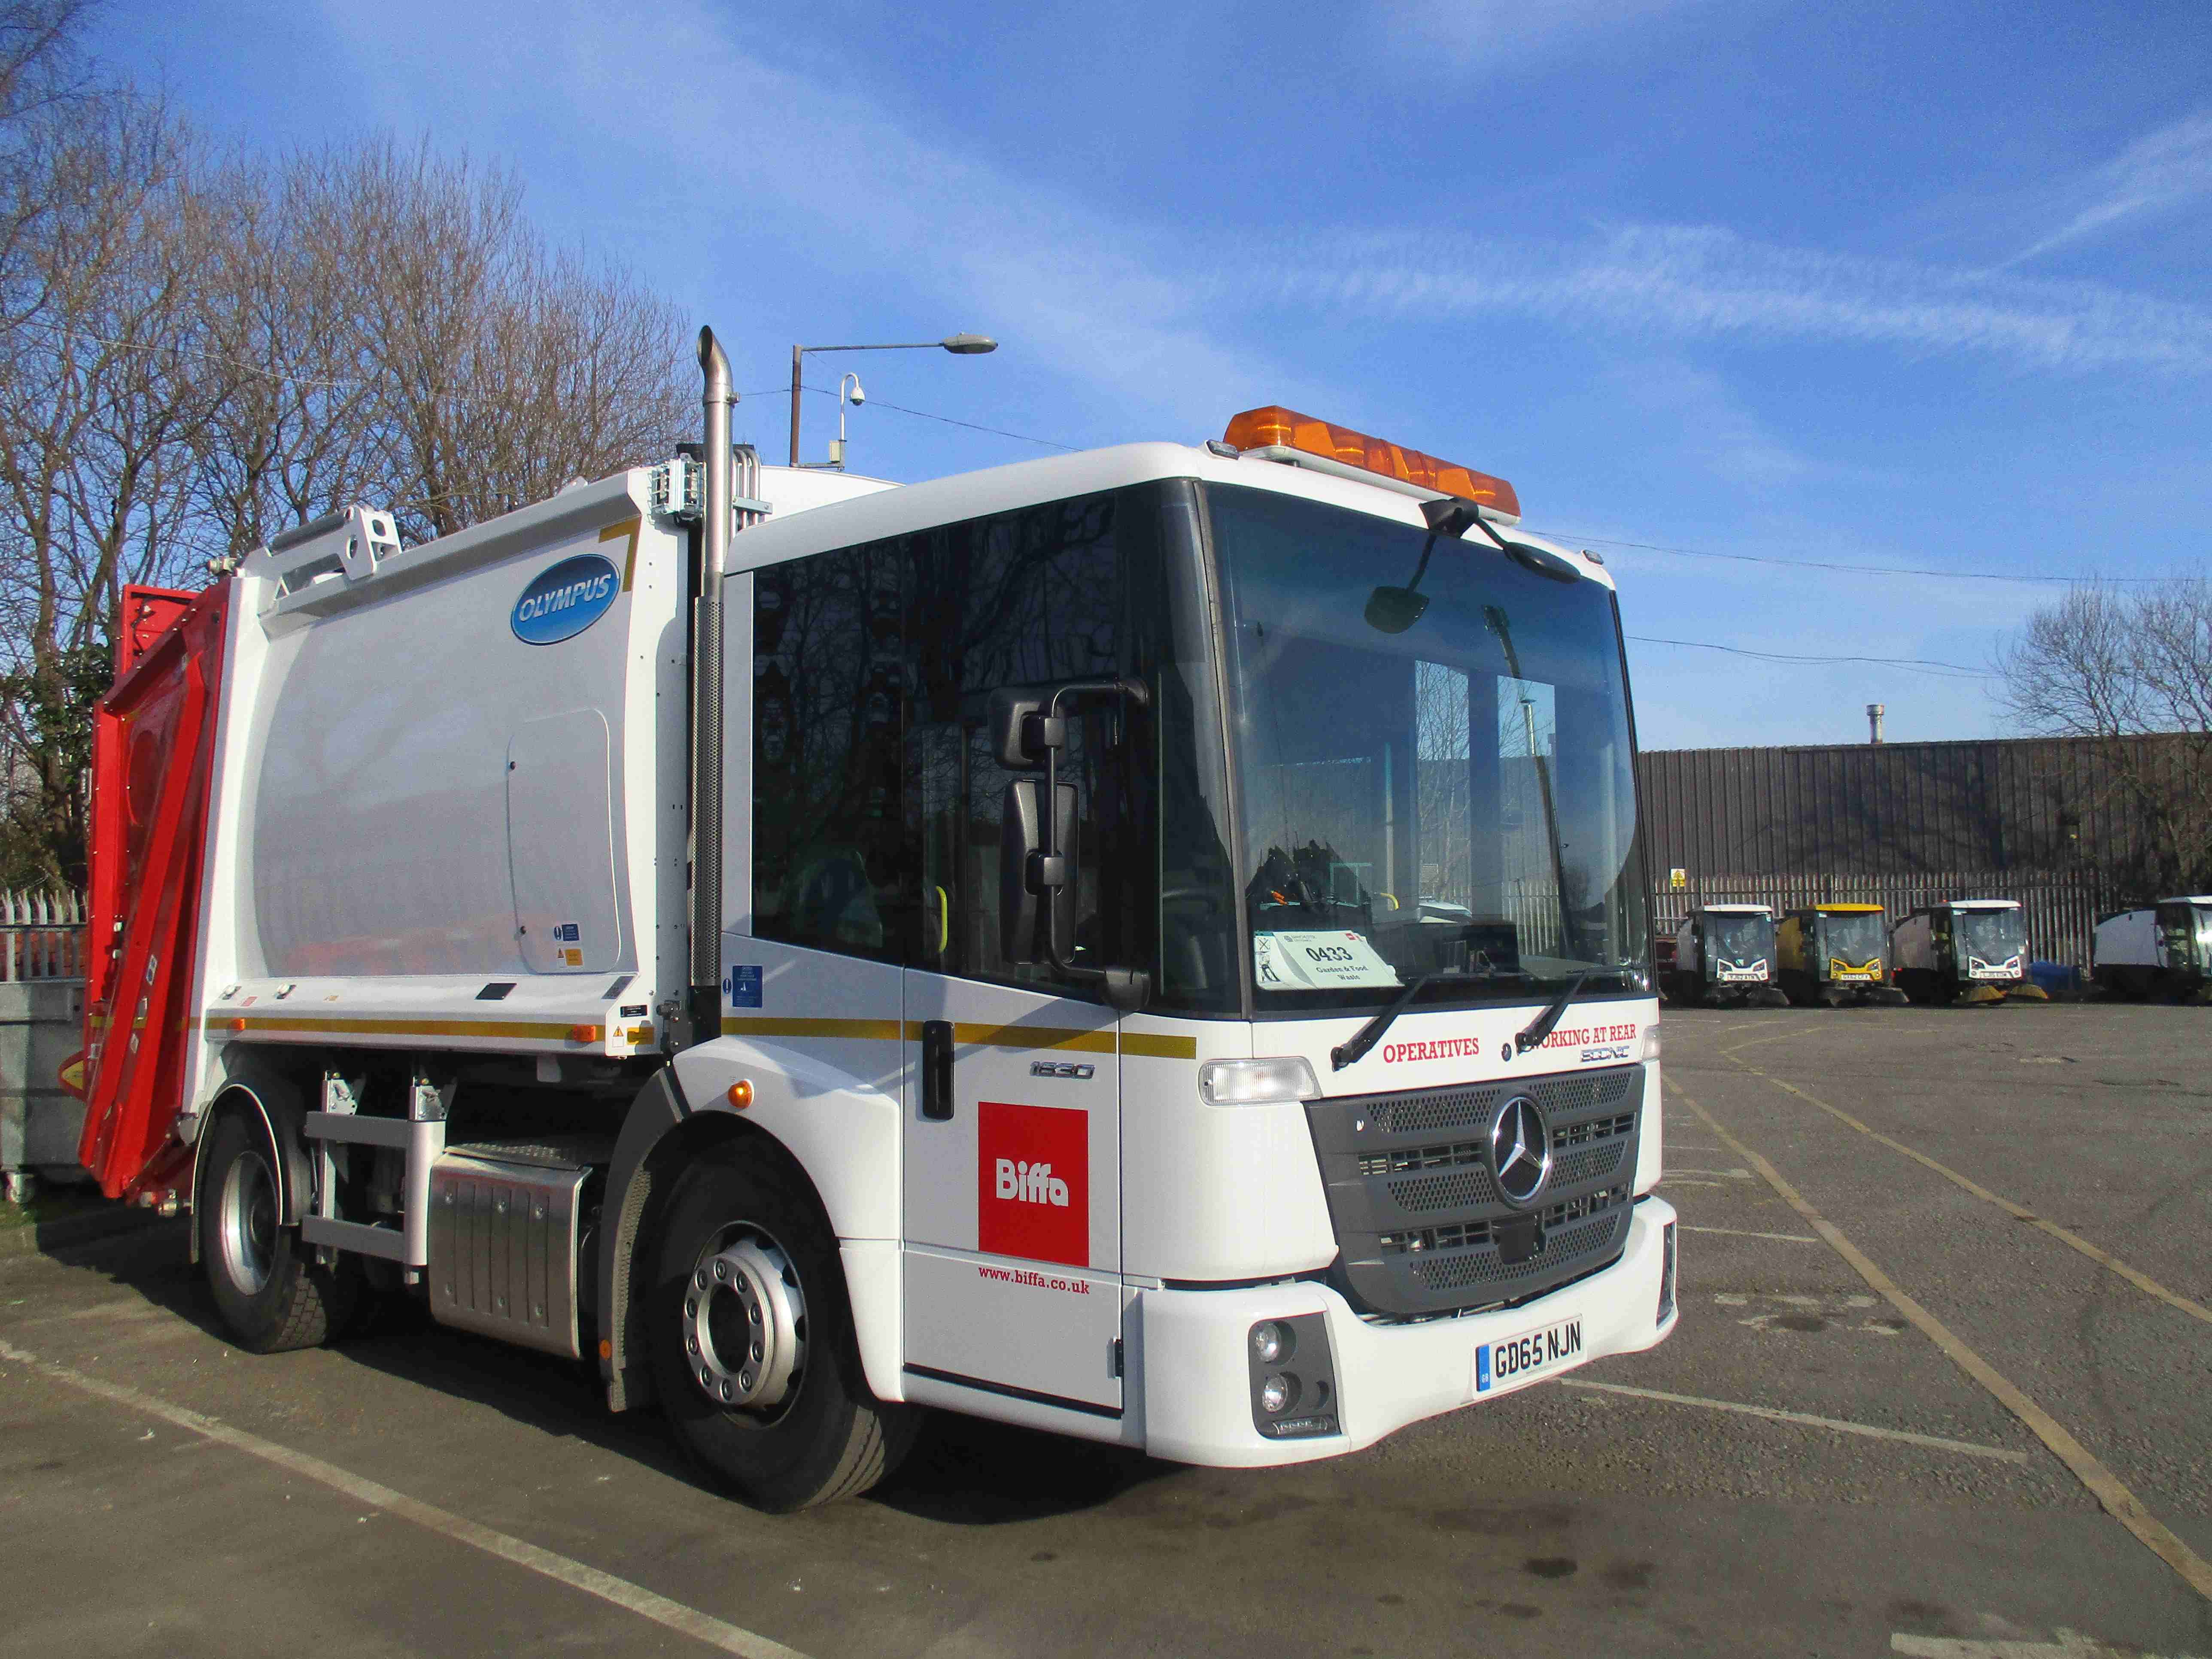 Biffa invests in Manchester waste fleet - letsrecycle.com